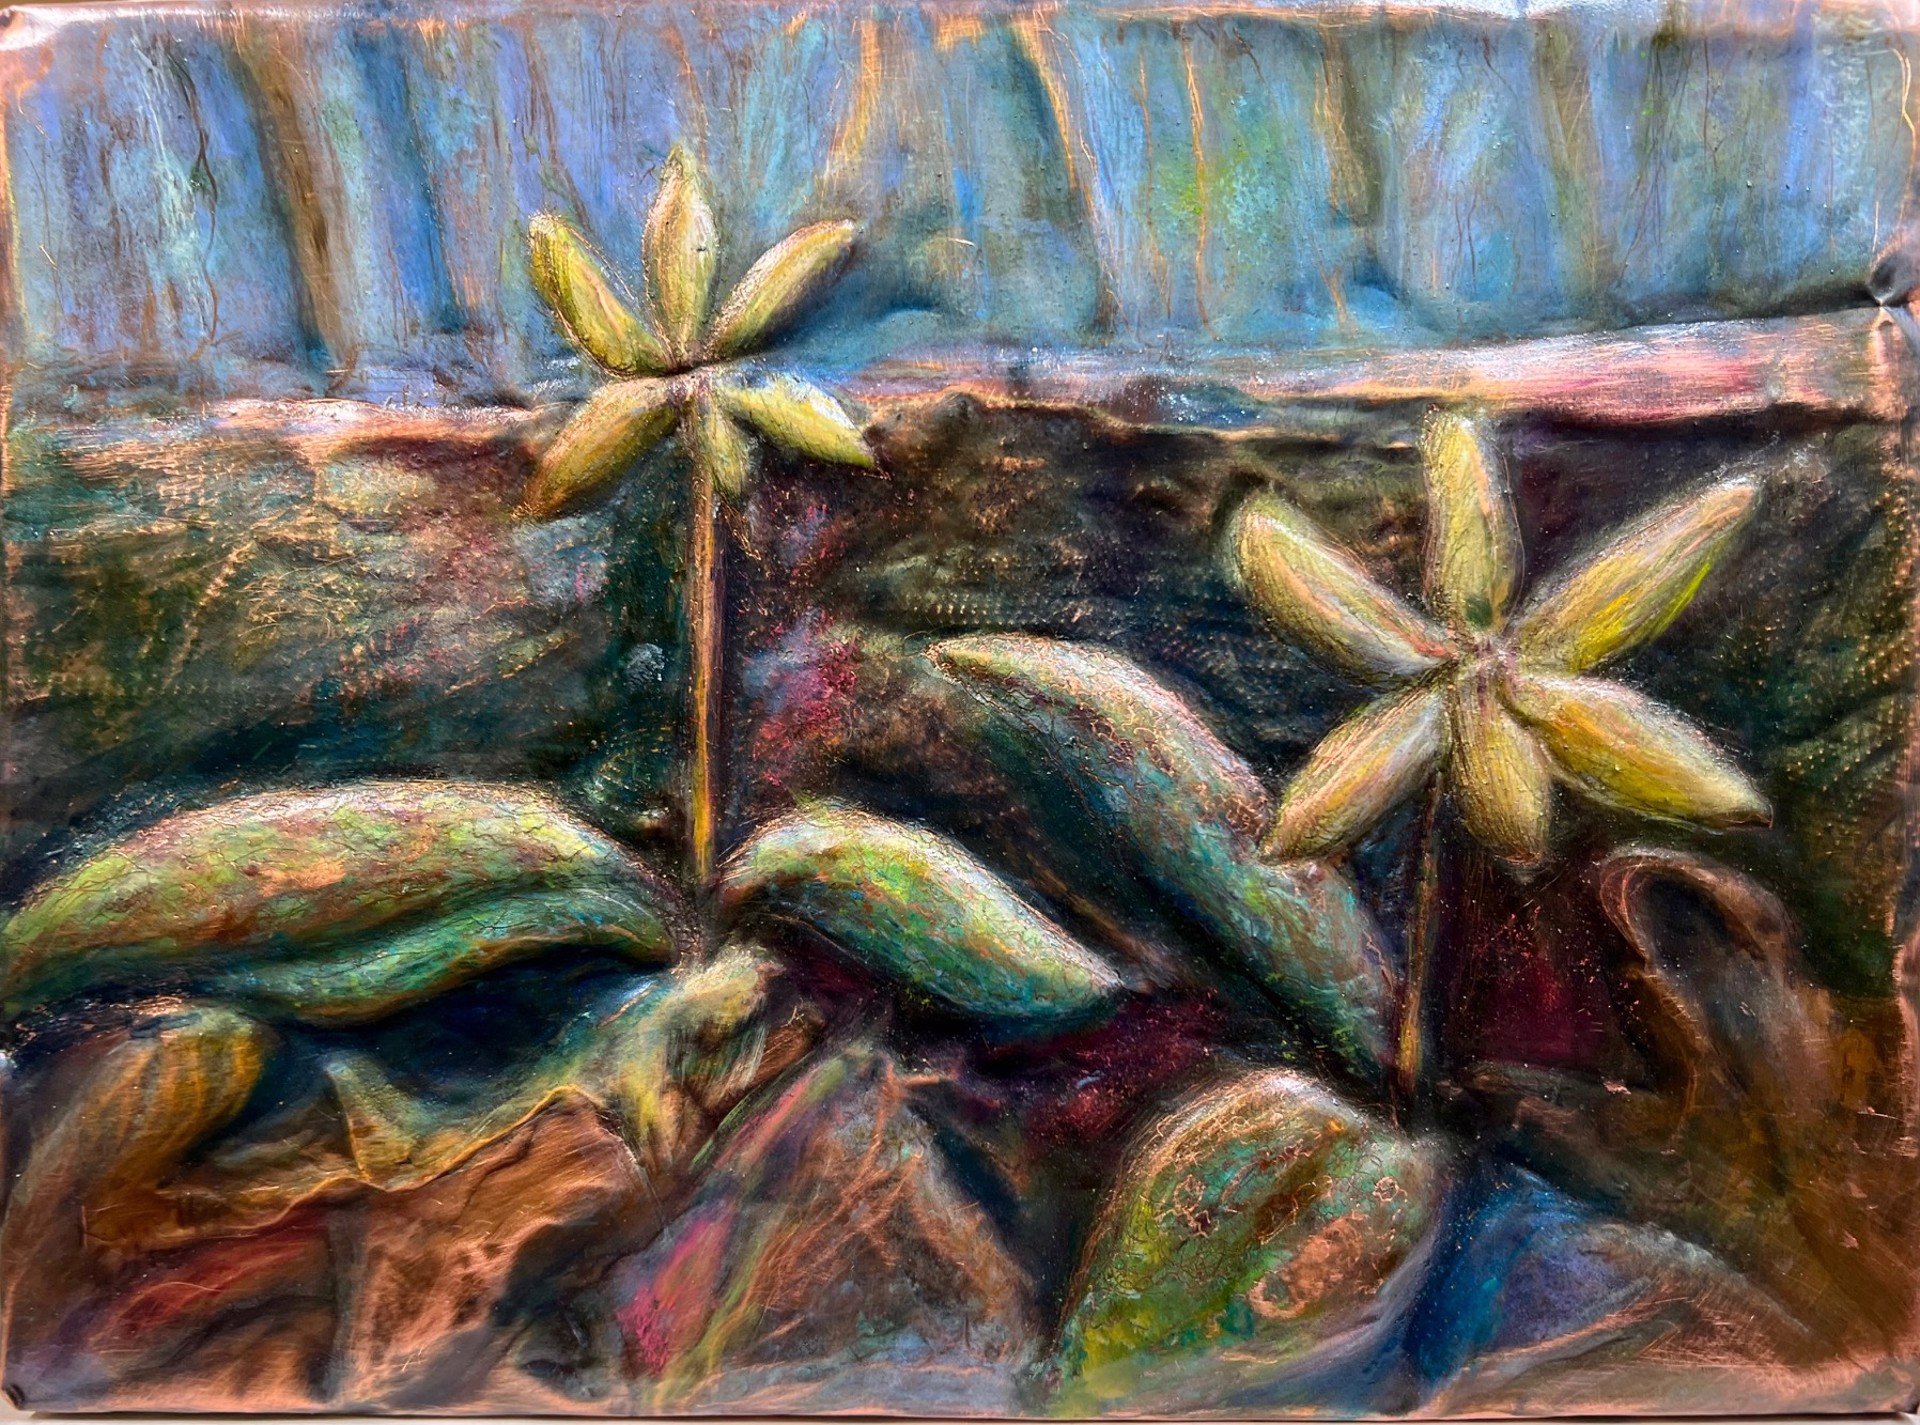 Trout Lilies Announce Spring by Kanella Otto